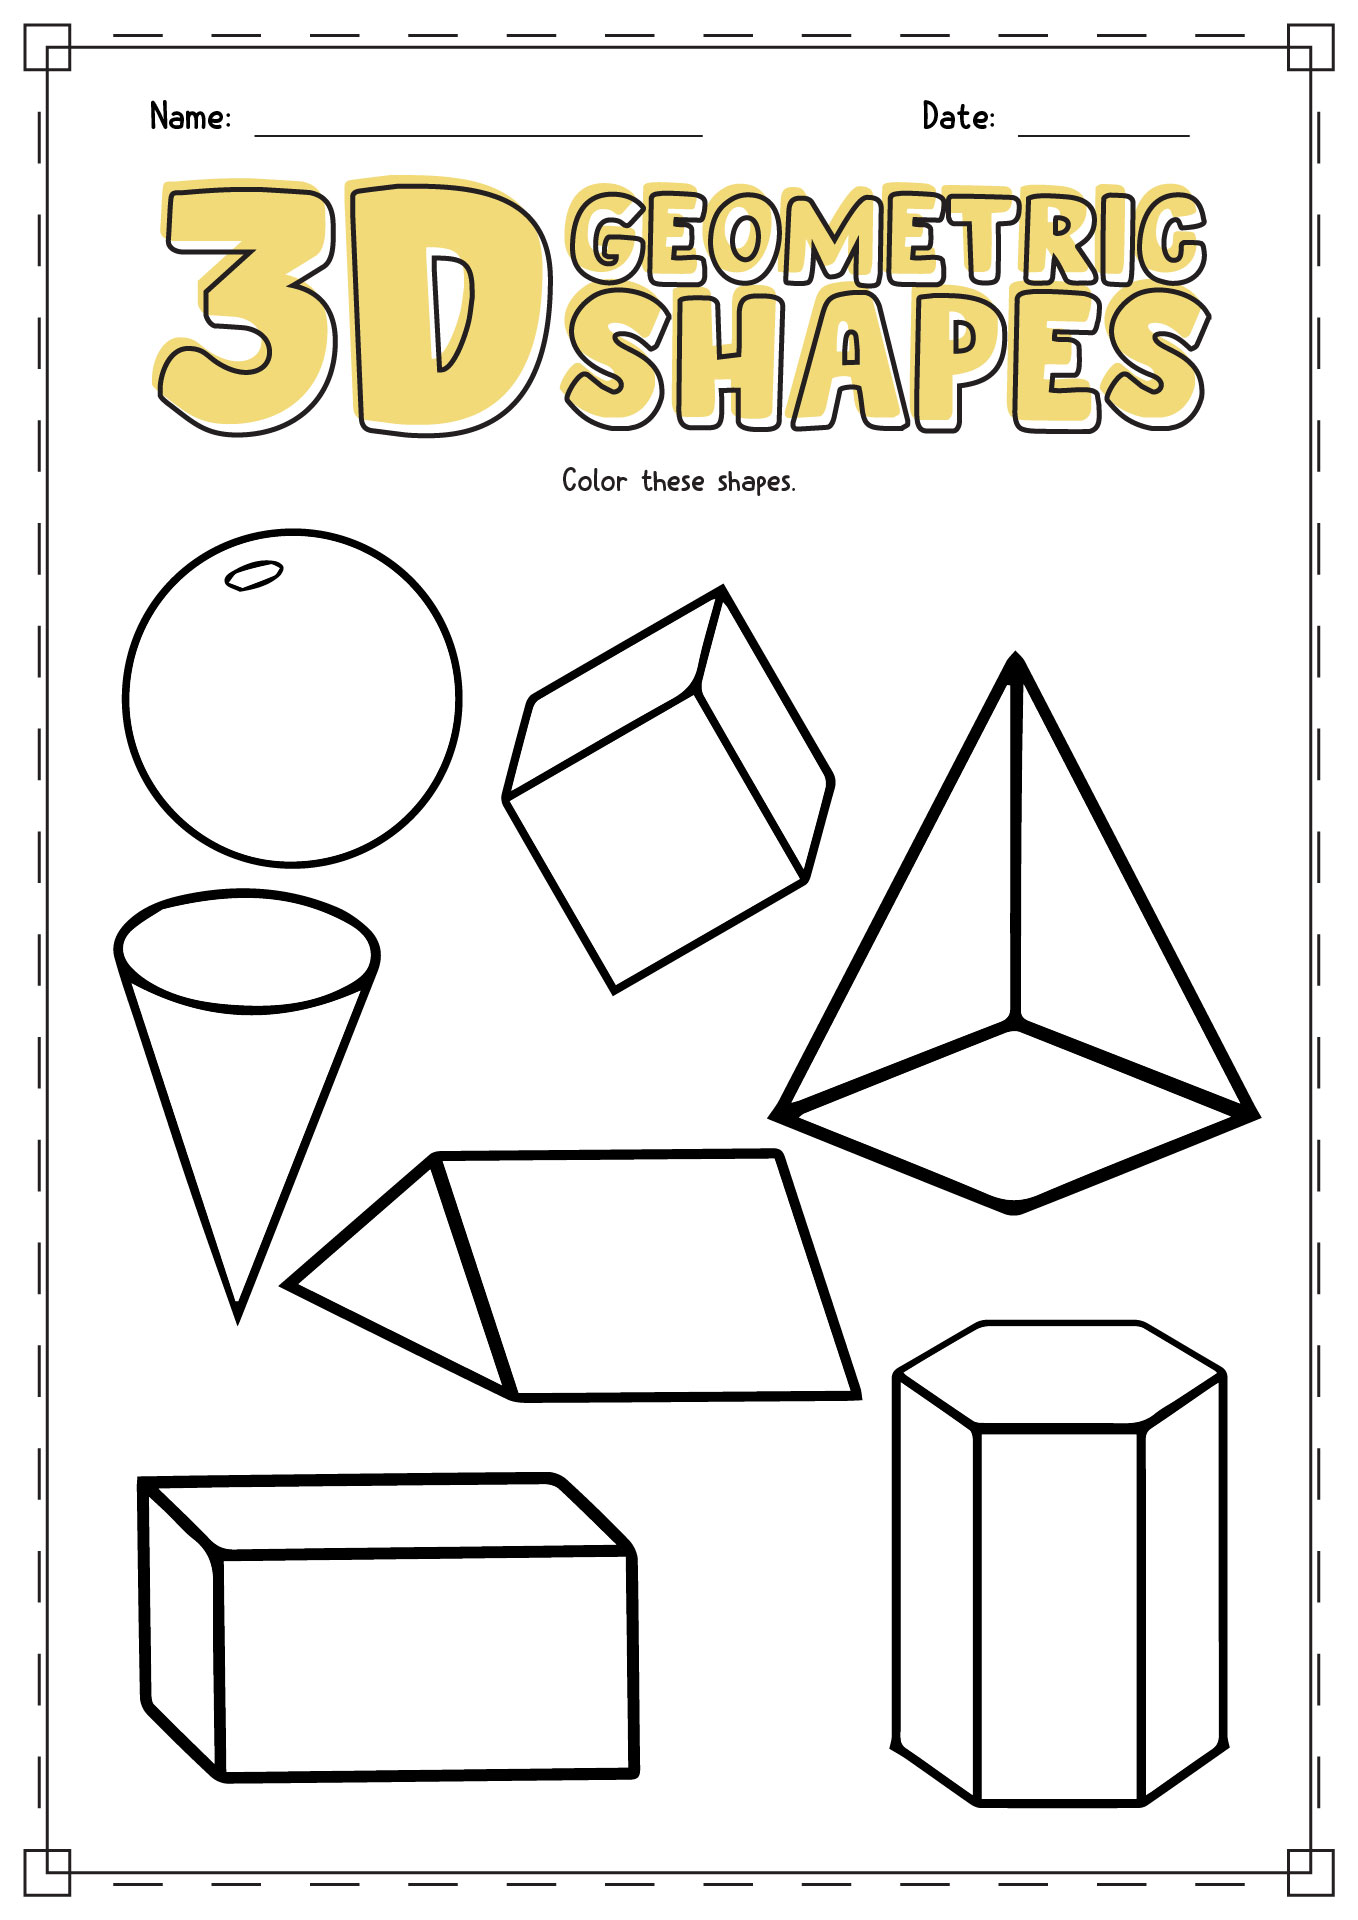 3D Geometric Shapes Coloring Page